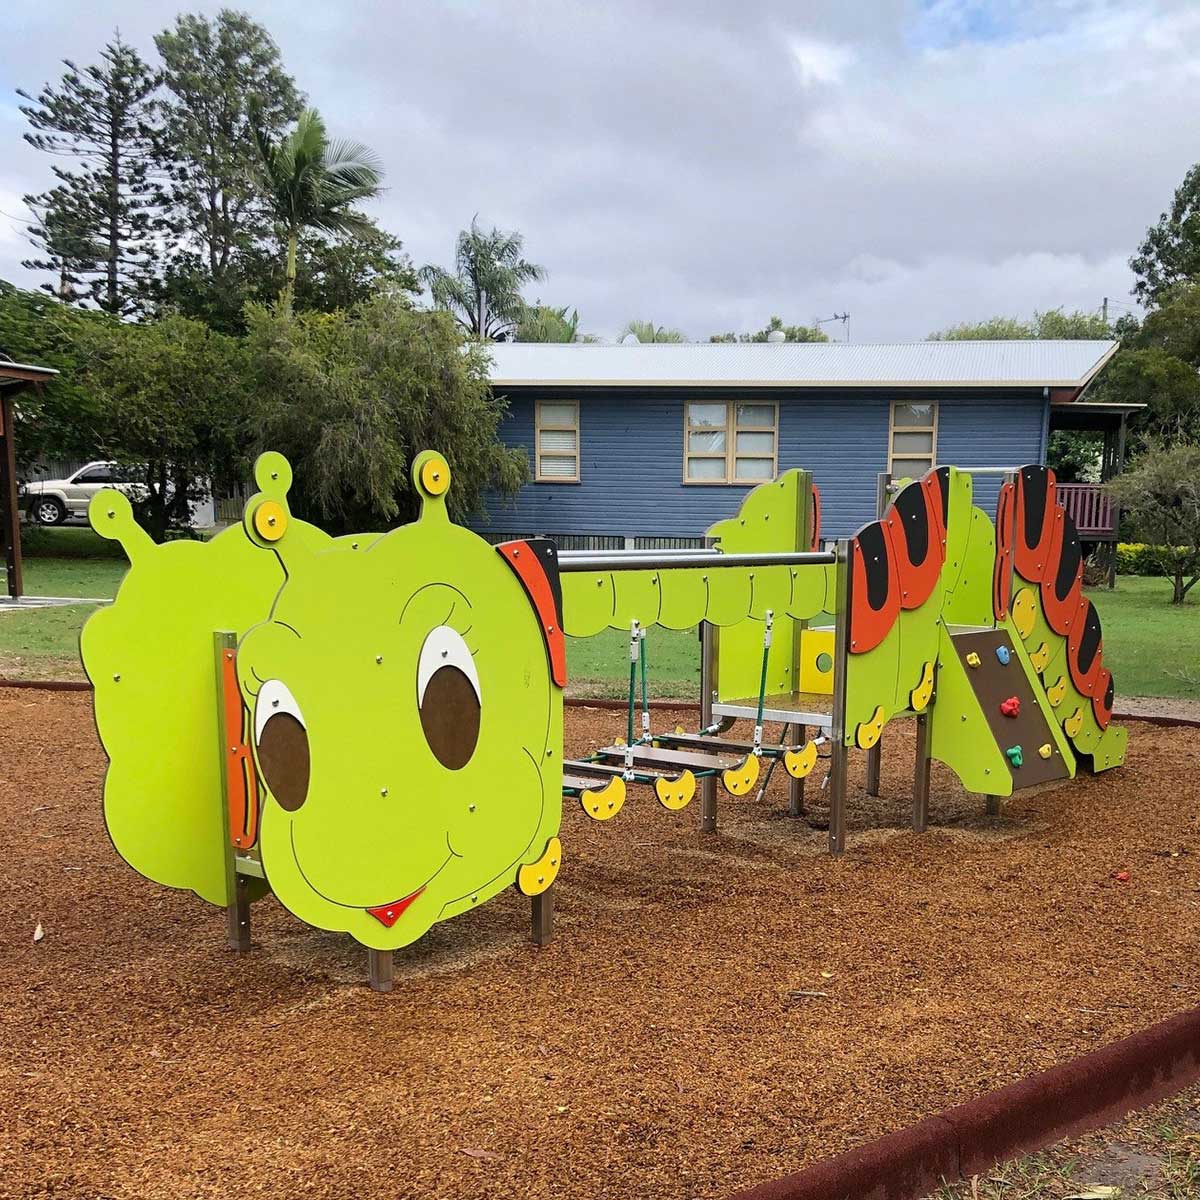 Themed playground with a playful caterpillar balance structure